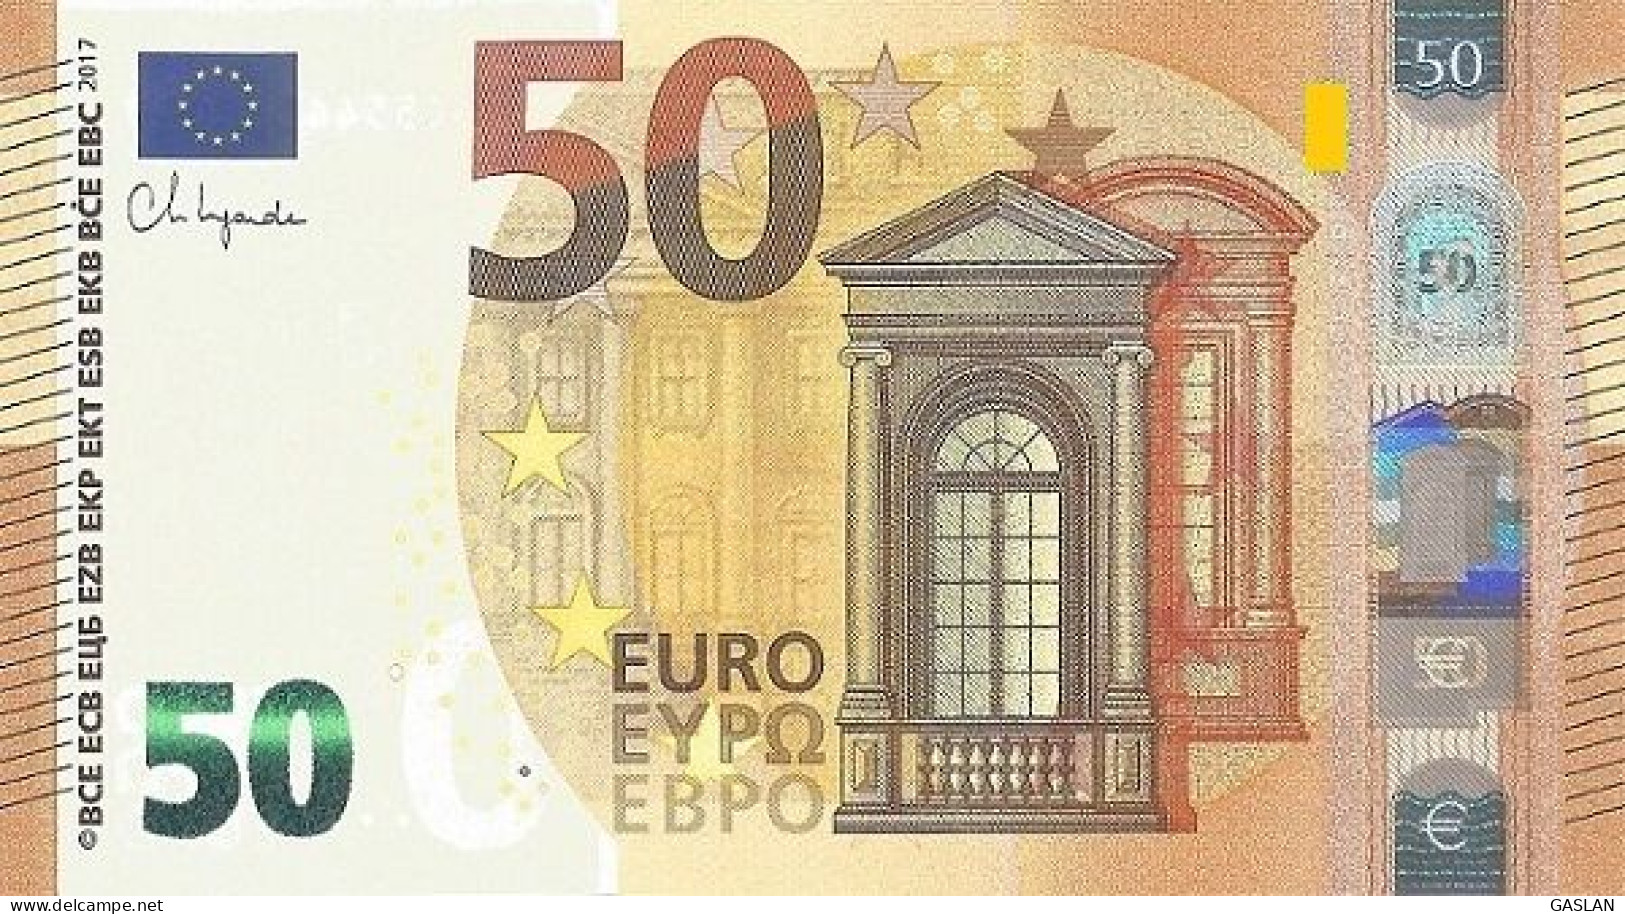 ITALY 50 SA SB SC SD SE S036 S037 S038 S039 S040 S041 S042 S046 S048 S049 S050 UNC LAGARDE ONLY ONE CODE - 50 Euro